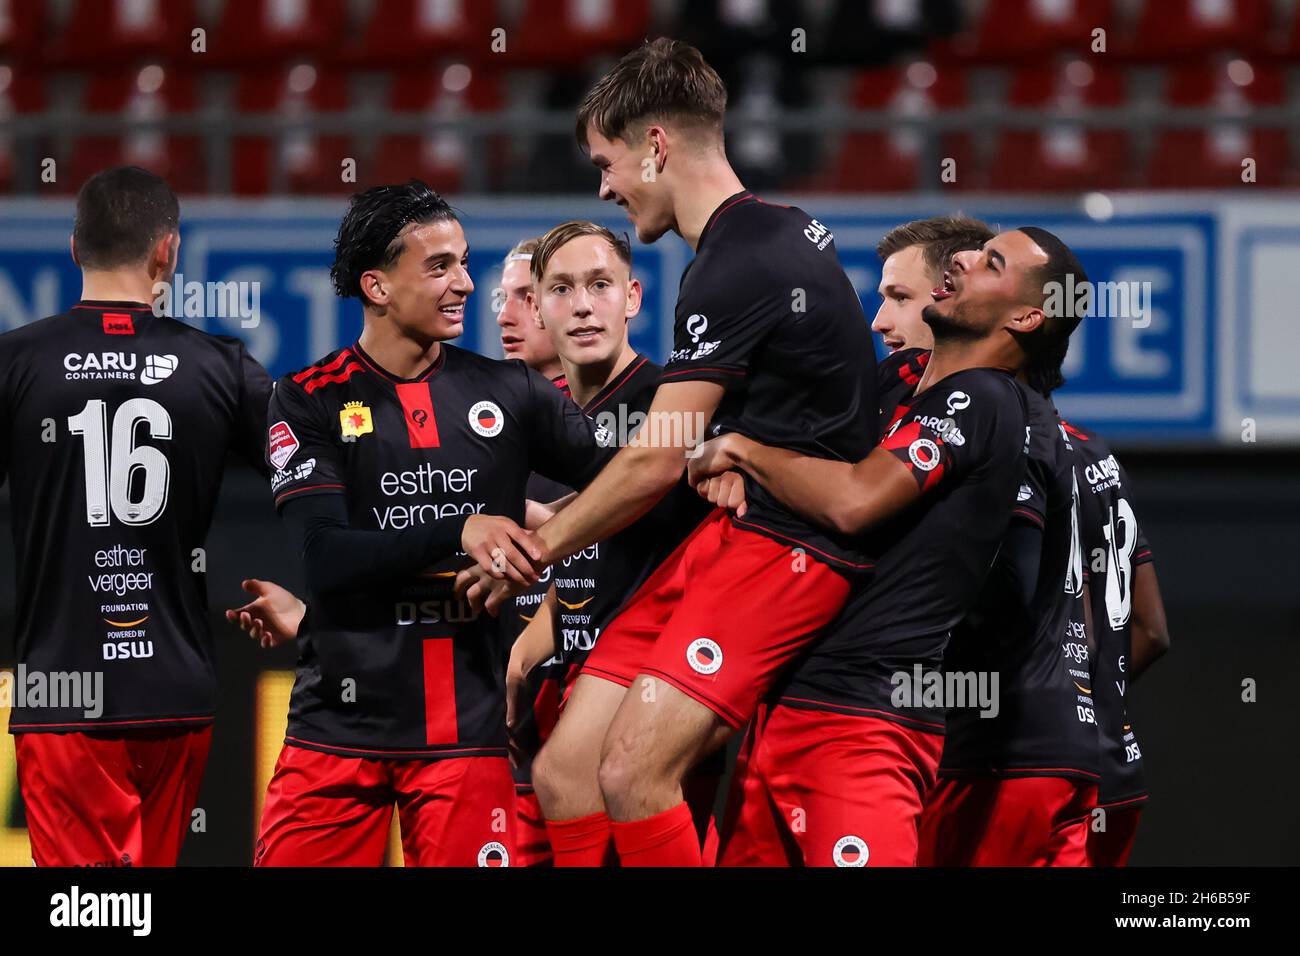 ROTTERDAM, NETHERLANDS - NOVEMBER 14: Abdallah Aberkane of Excelsior Rotterdam, Thijs Dallinga of Excelsior Rotterdam and Redouan El Yaakoubi of Excelsior Rotterdam celebrate their sides third goal during the Dutch Keukenkampioendivisie match between Excelsior and Almere City FC at the Van Donge & De Roo Stadion on November 14, 2021 in Rotterdam, Netherlands (Photo by Herman Dingler/Orange Pictures) Stock Photo